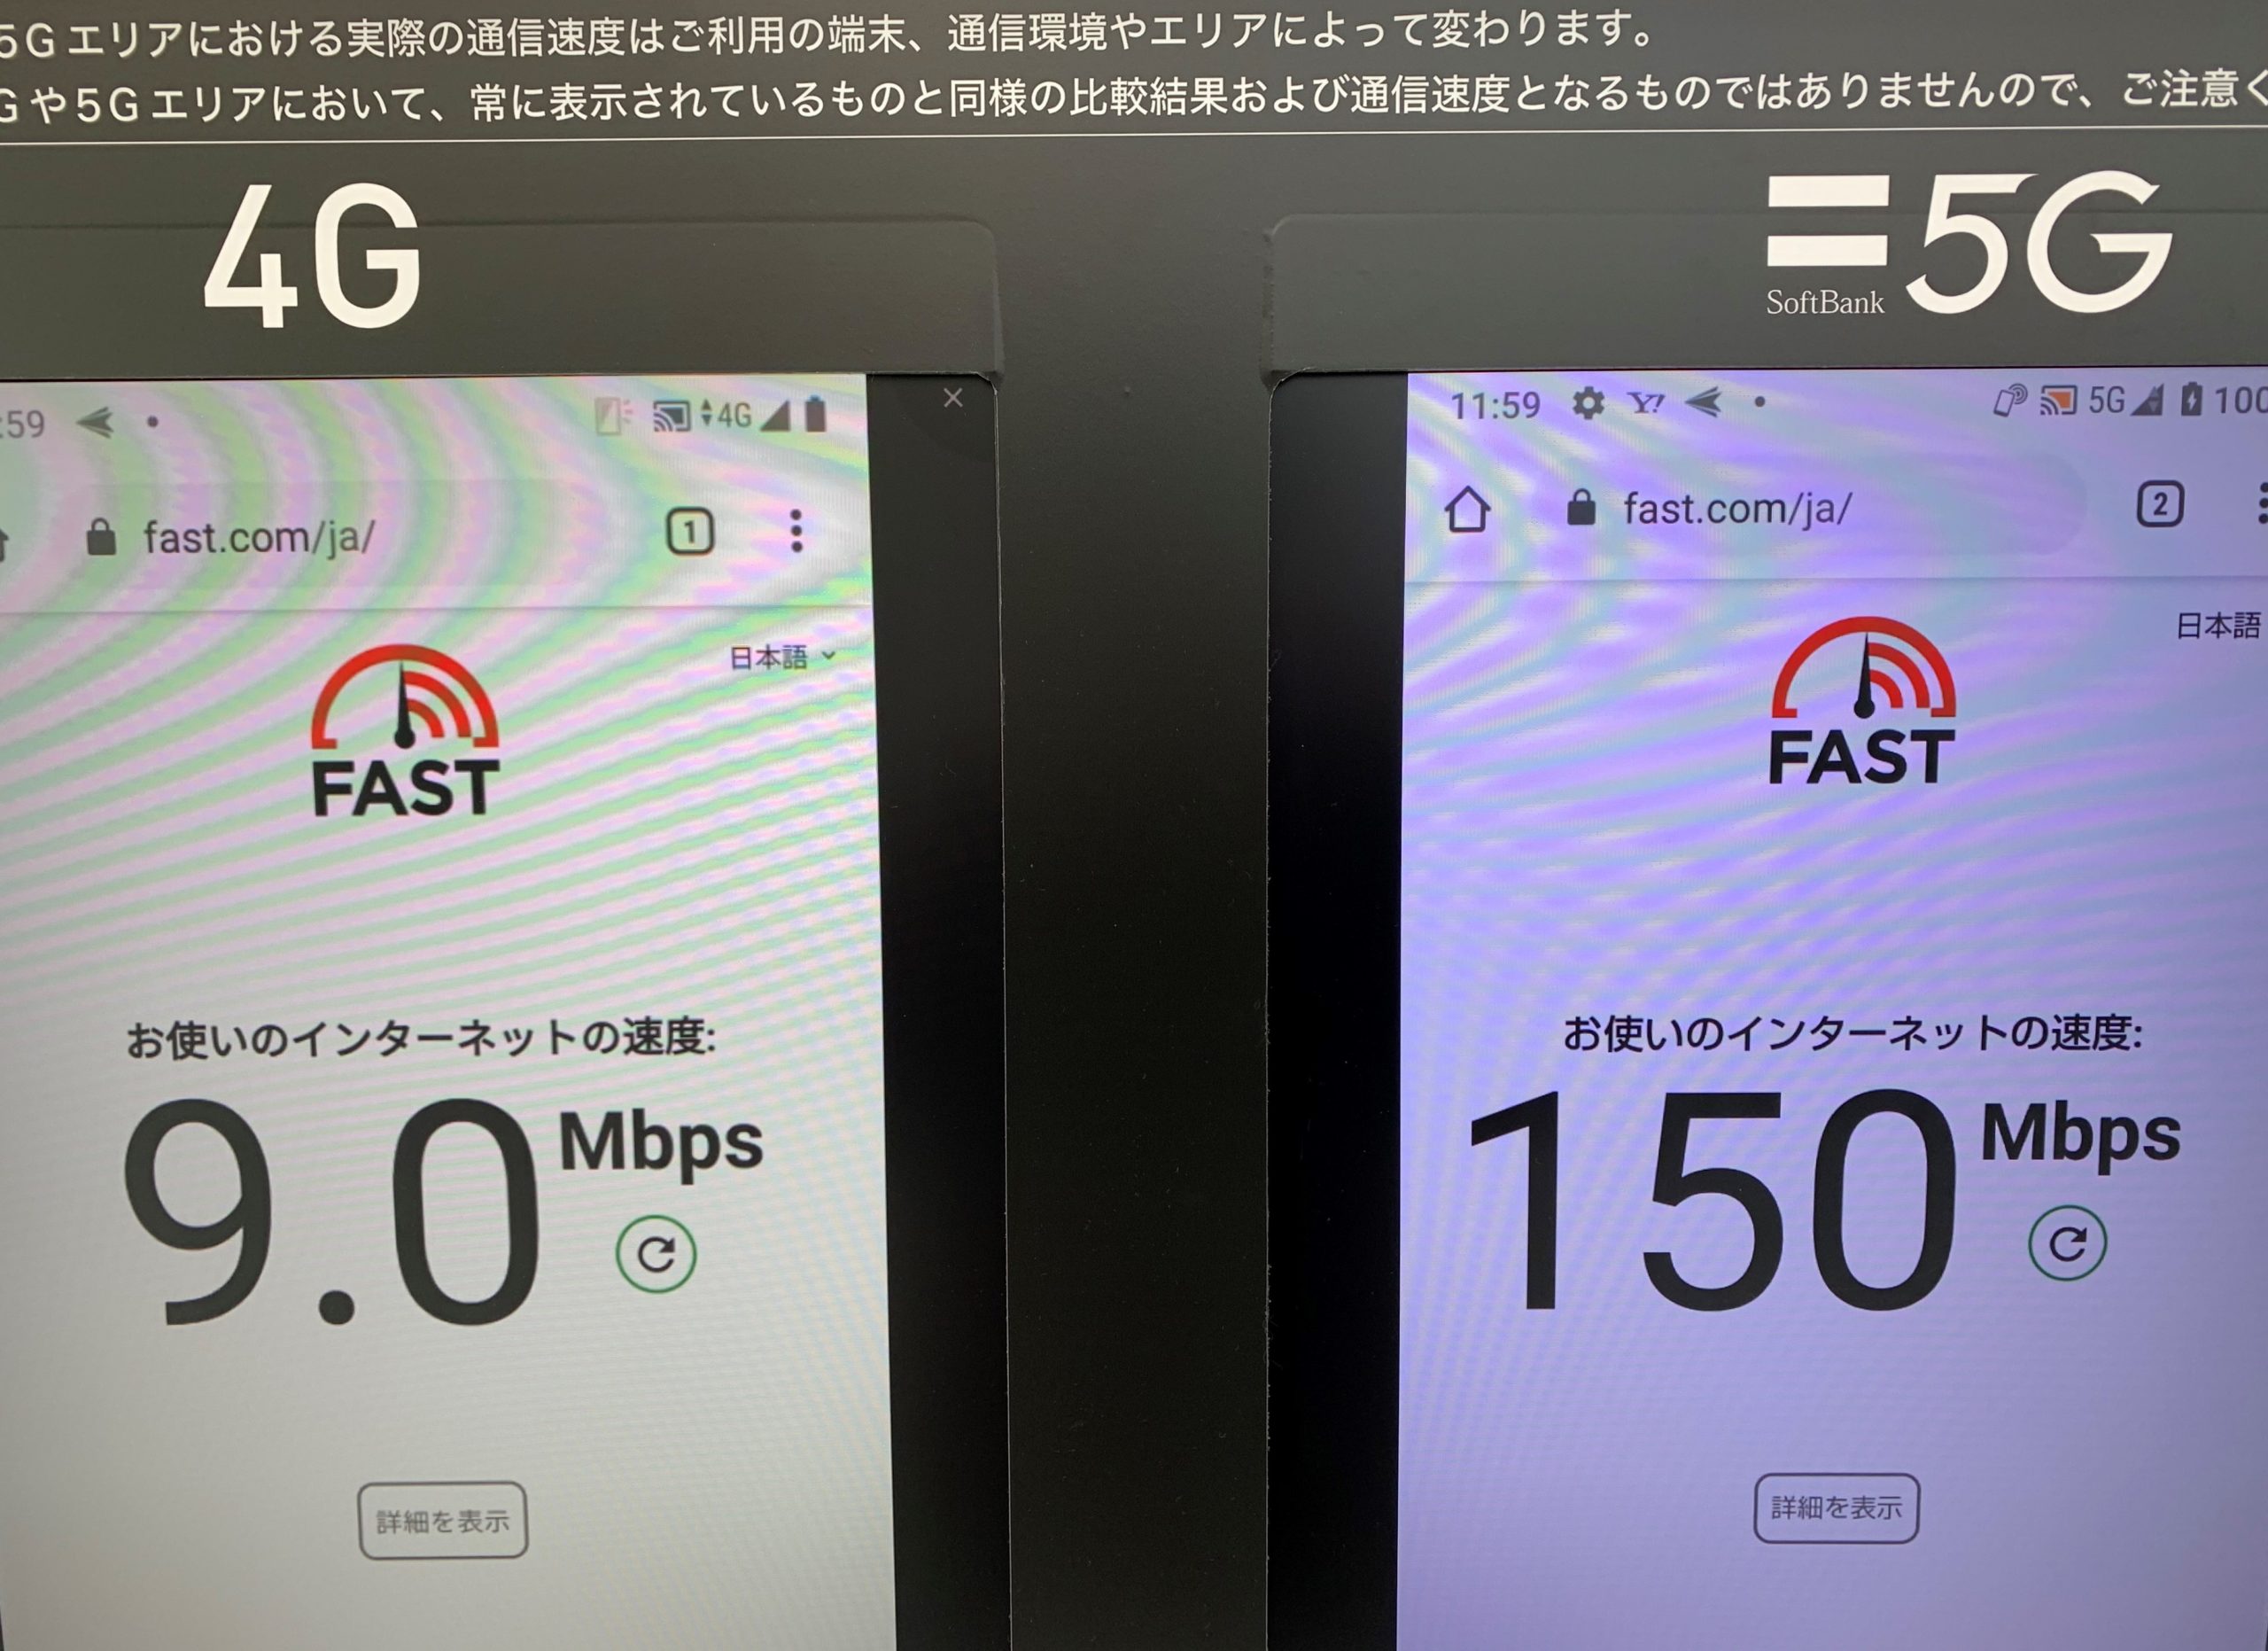 4Gと5G比較①